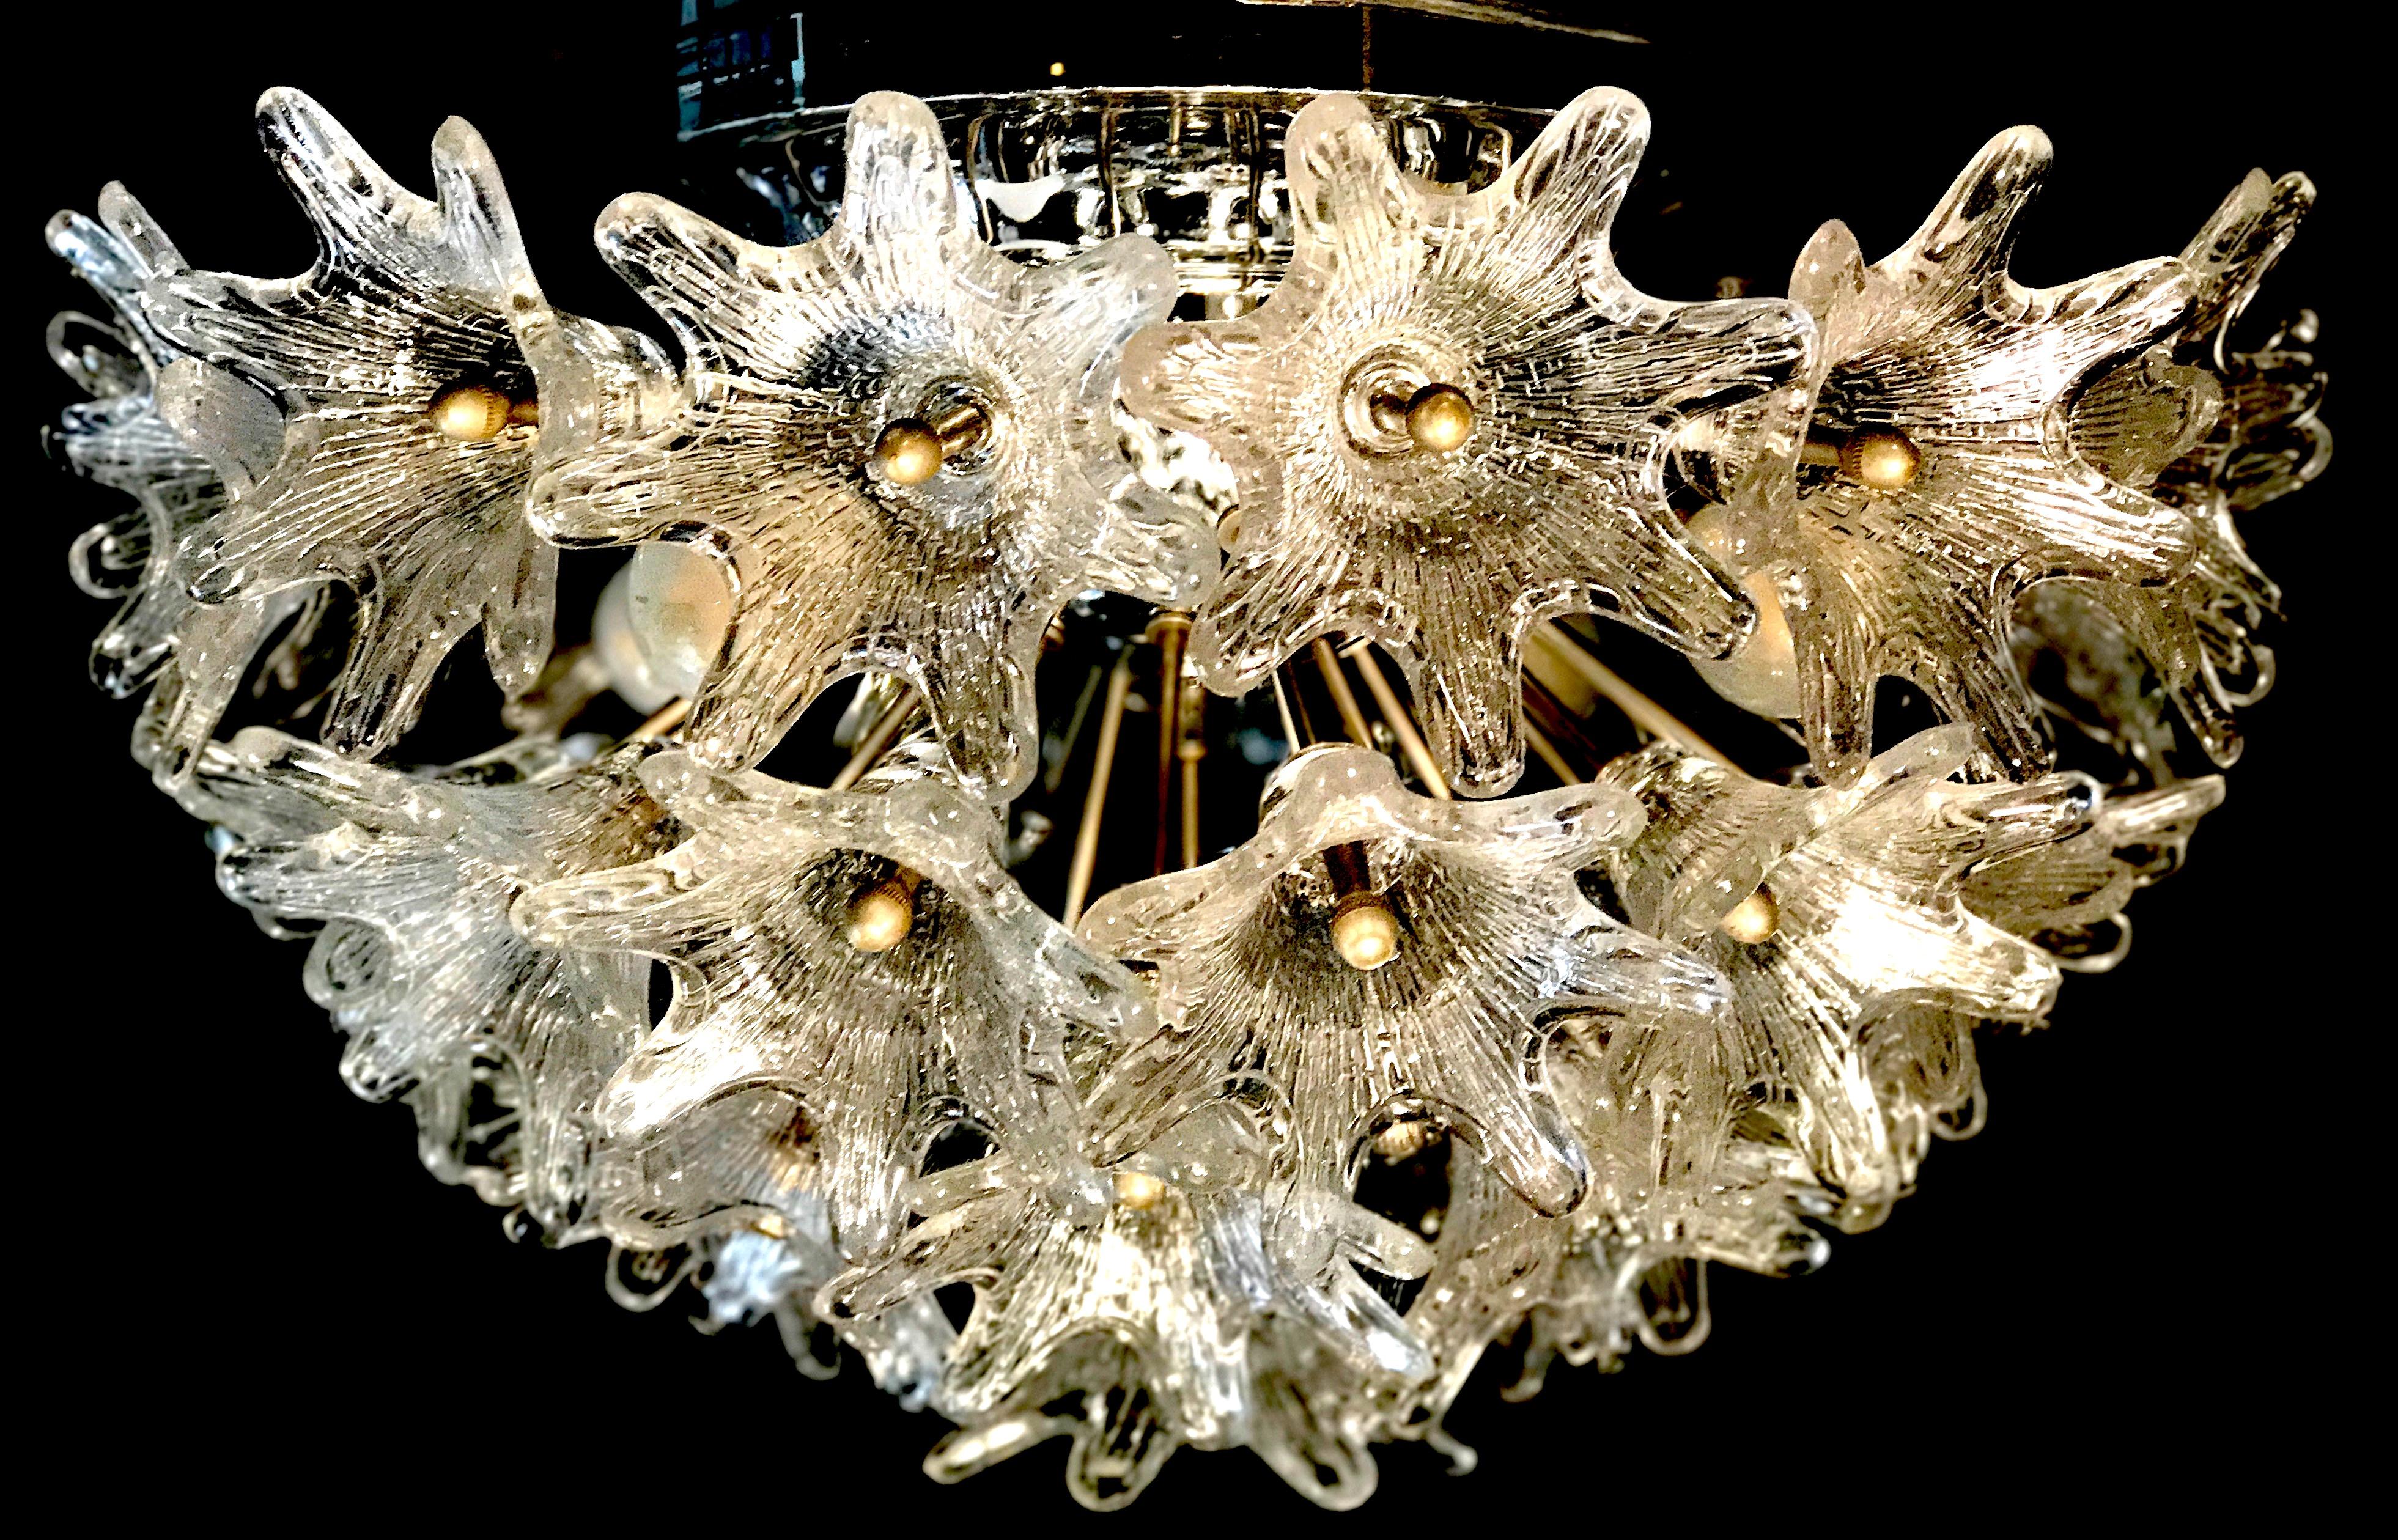 Flush mount Murano glass chandelier by Paolo Venini for VeArt, Italy with 32 clear glass flowers on a chrome sputnik frame. Amazing eye catching piece designed in the 1960s, Italy. The lamp takes four small Edison base bulbs.